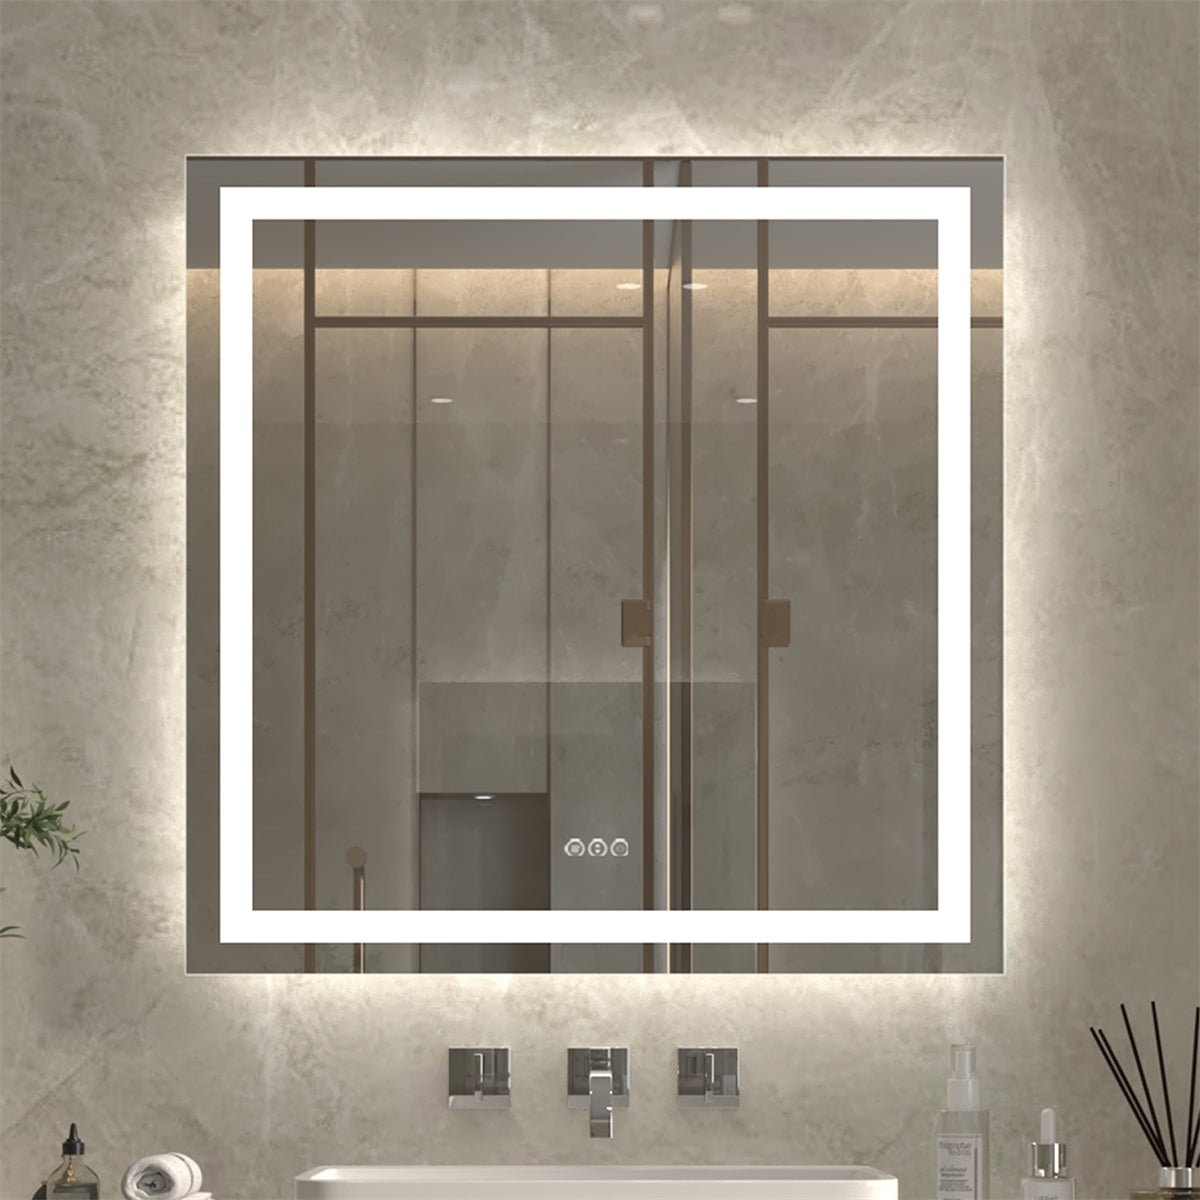 ExBrite 36" W X 36" H LED Bathroom Large Light Led Mirror,Anti Fog,Dimmable,Dual Lighting Mode,Tempered Glass